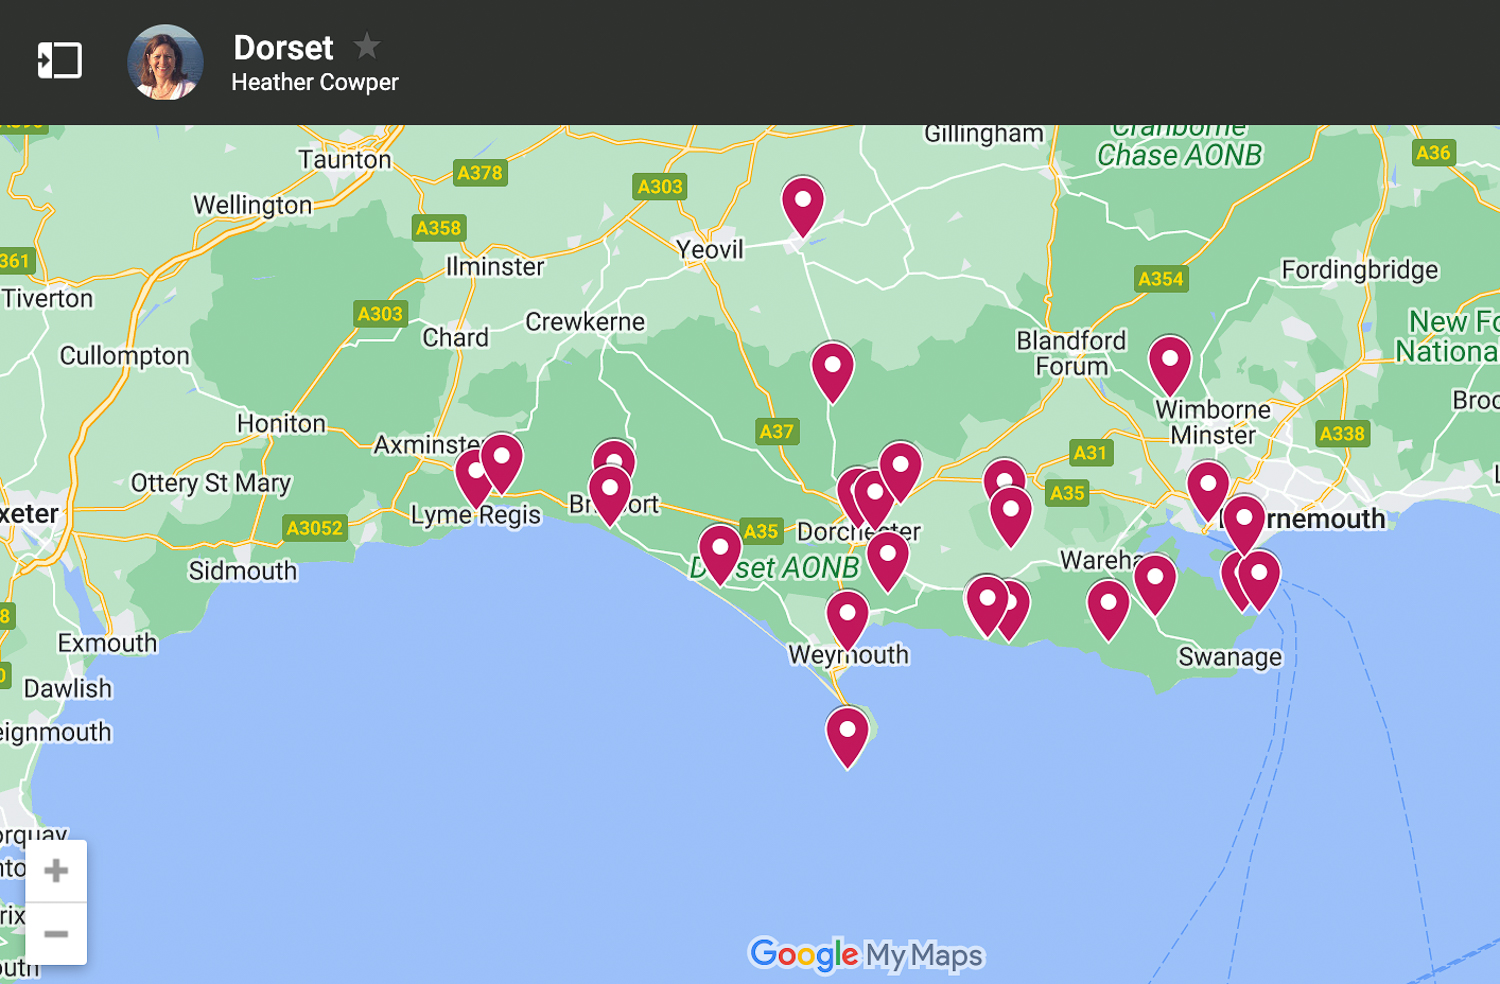 Map of things to do in Dorset by Heatheronhertravels.com